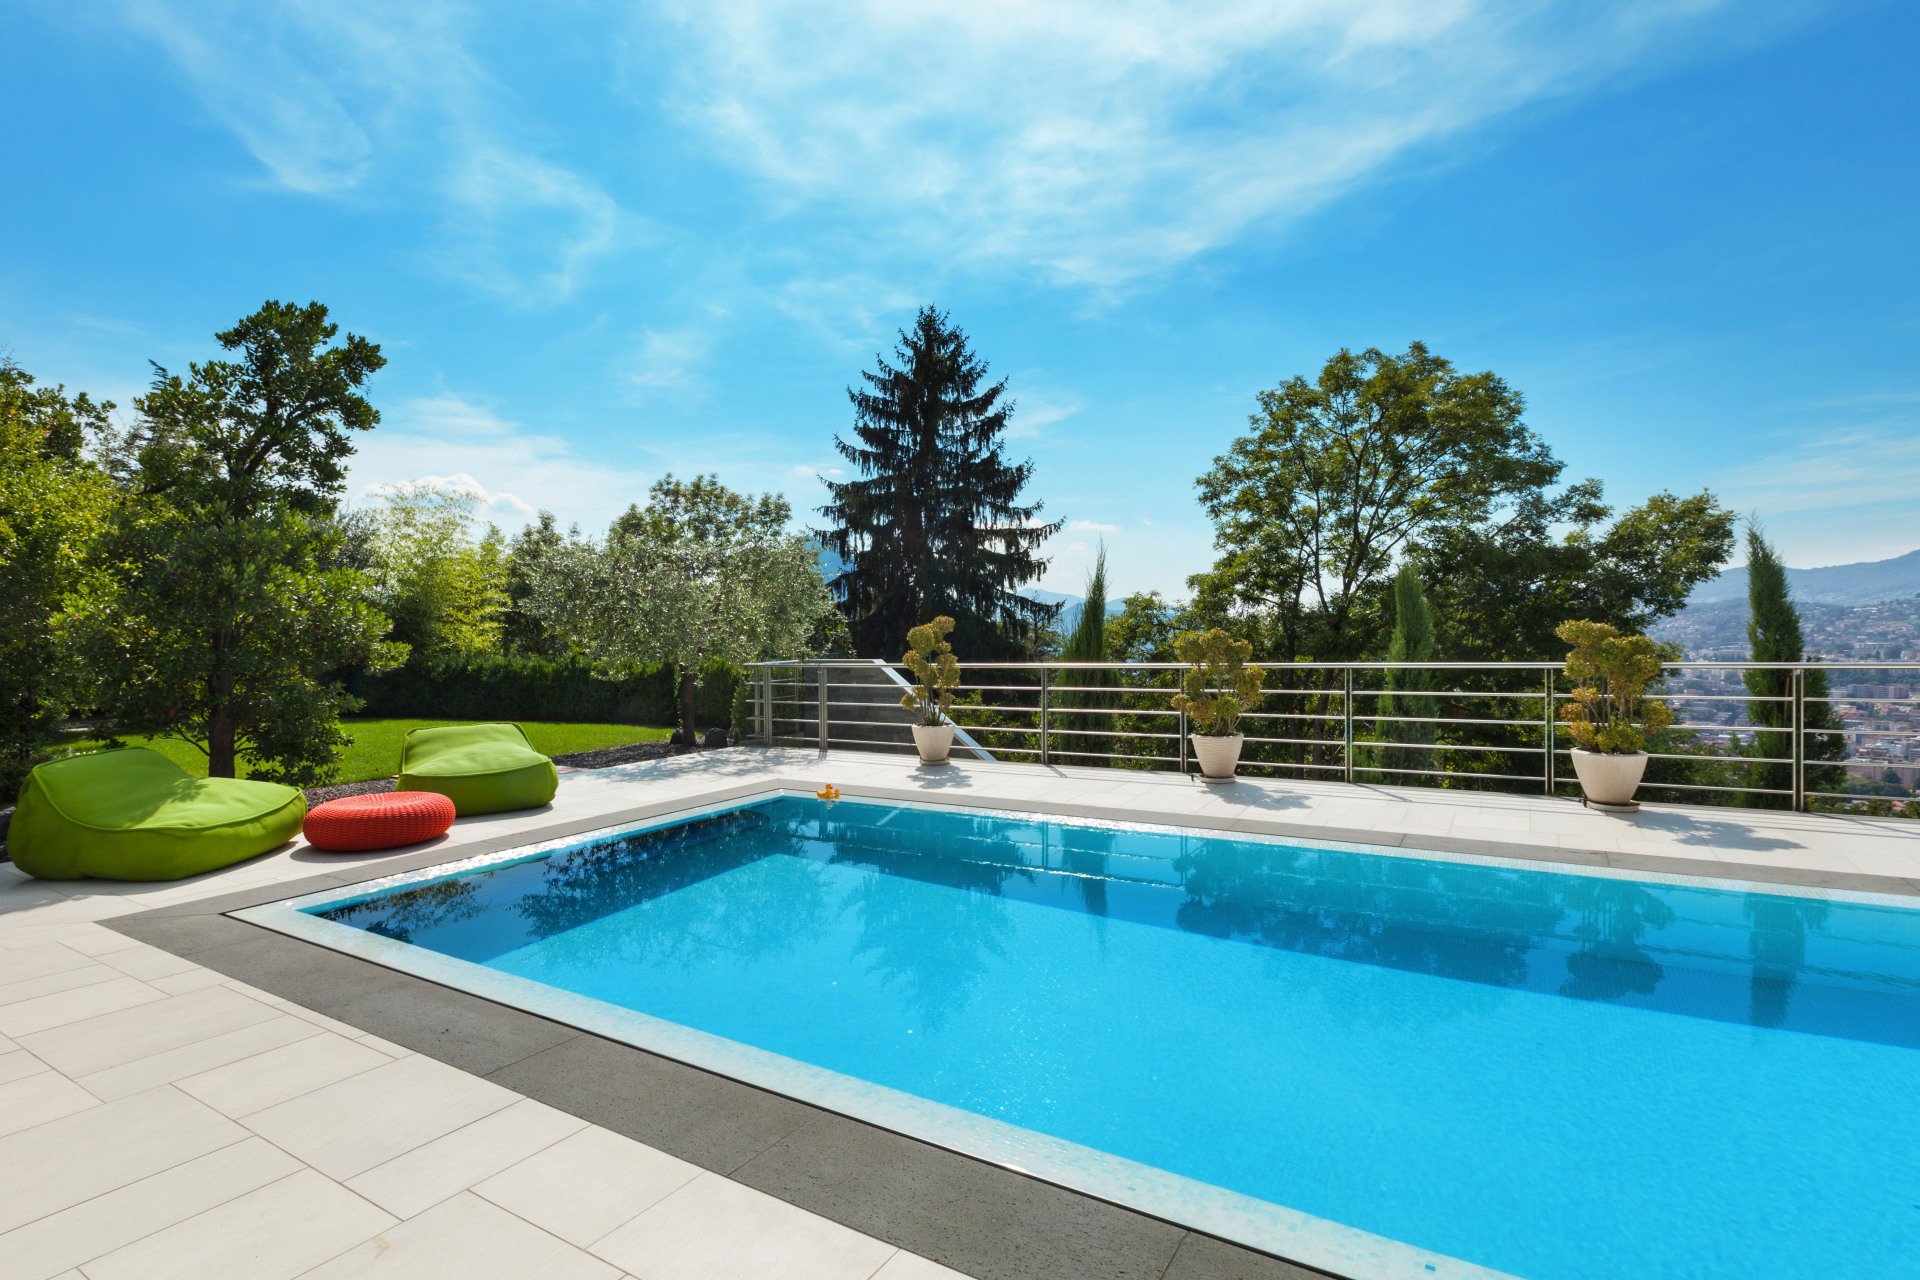 Choosing the Best Pool Installation Company: Factors to Consider